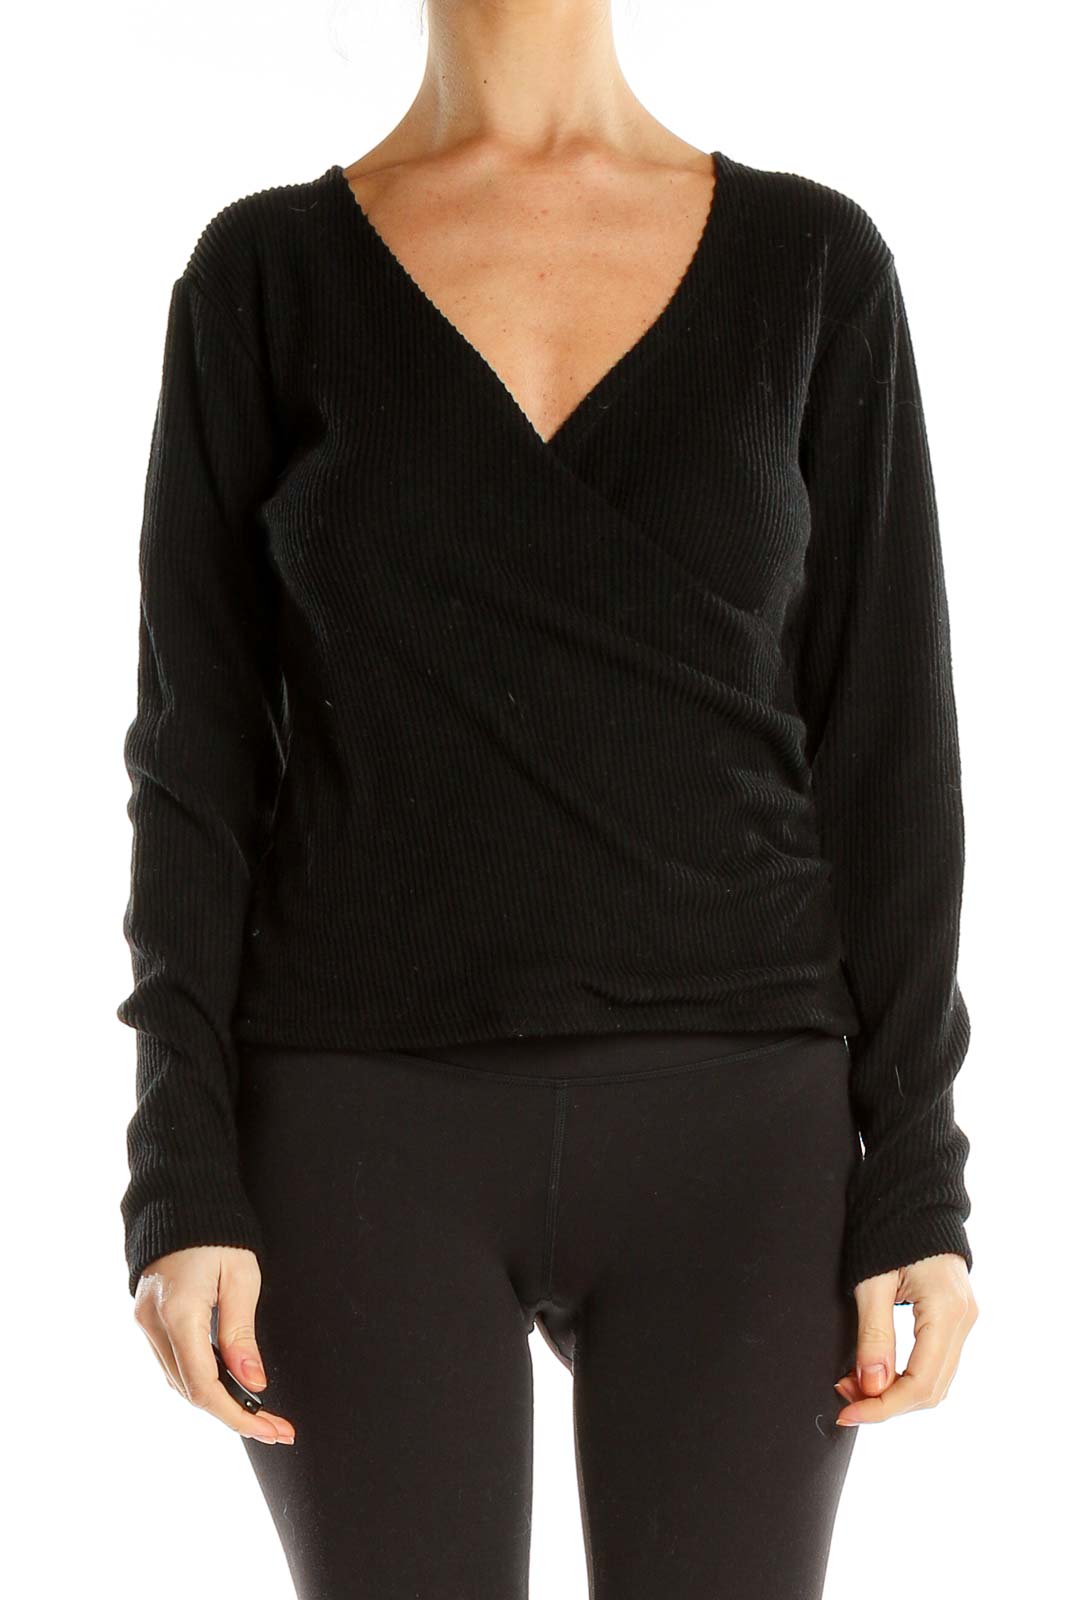 Black Wrap All Day Wear Knit Top Front